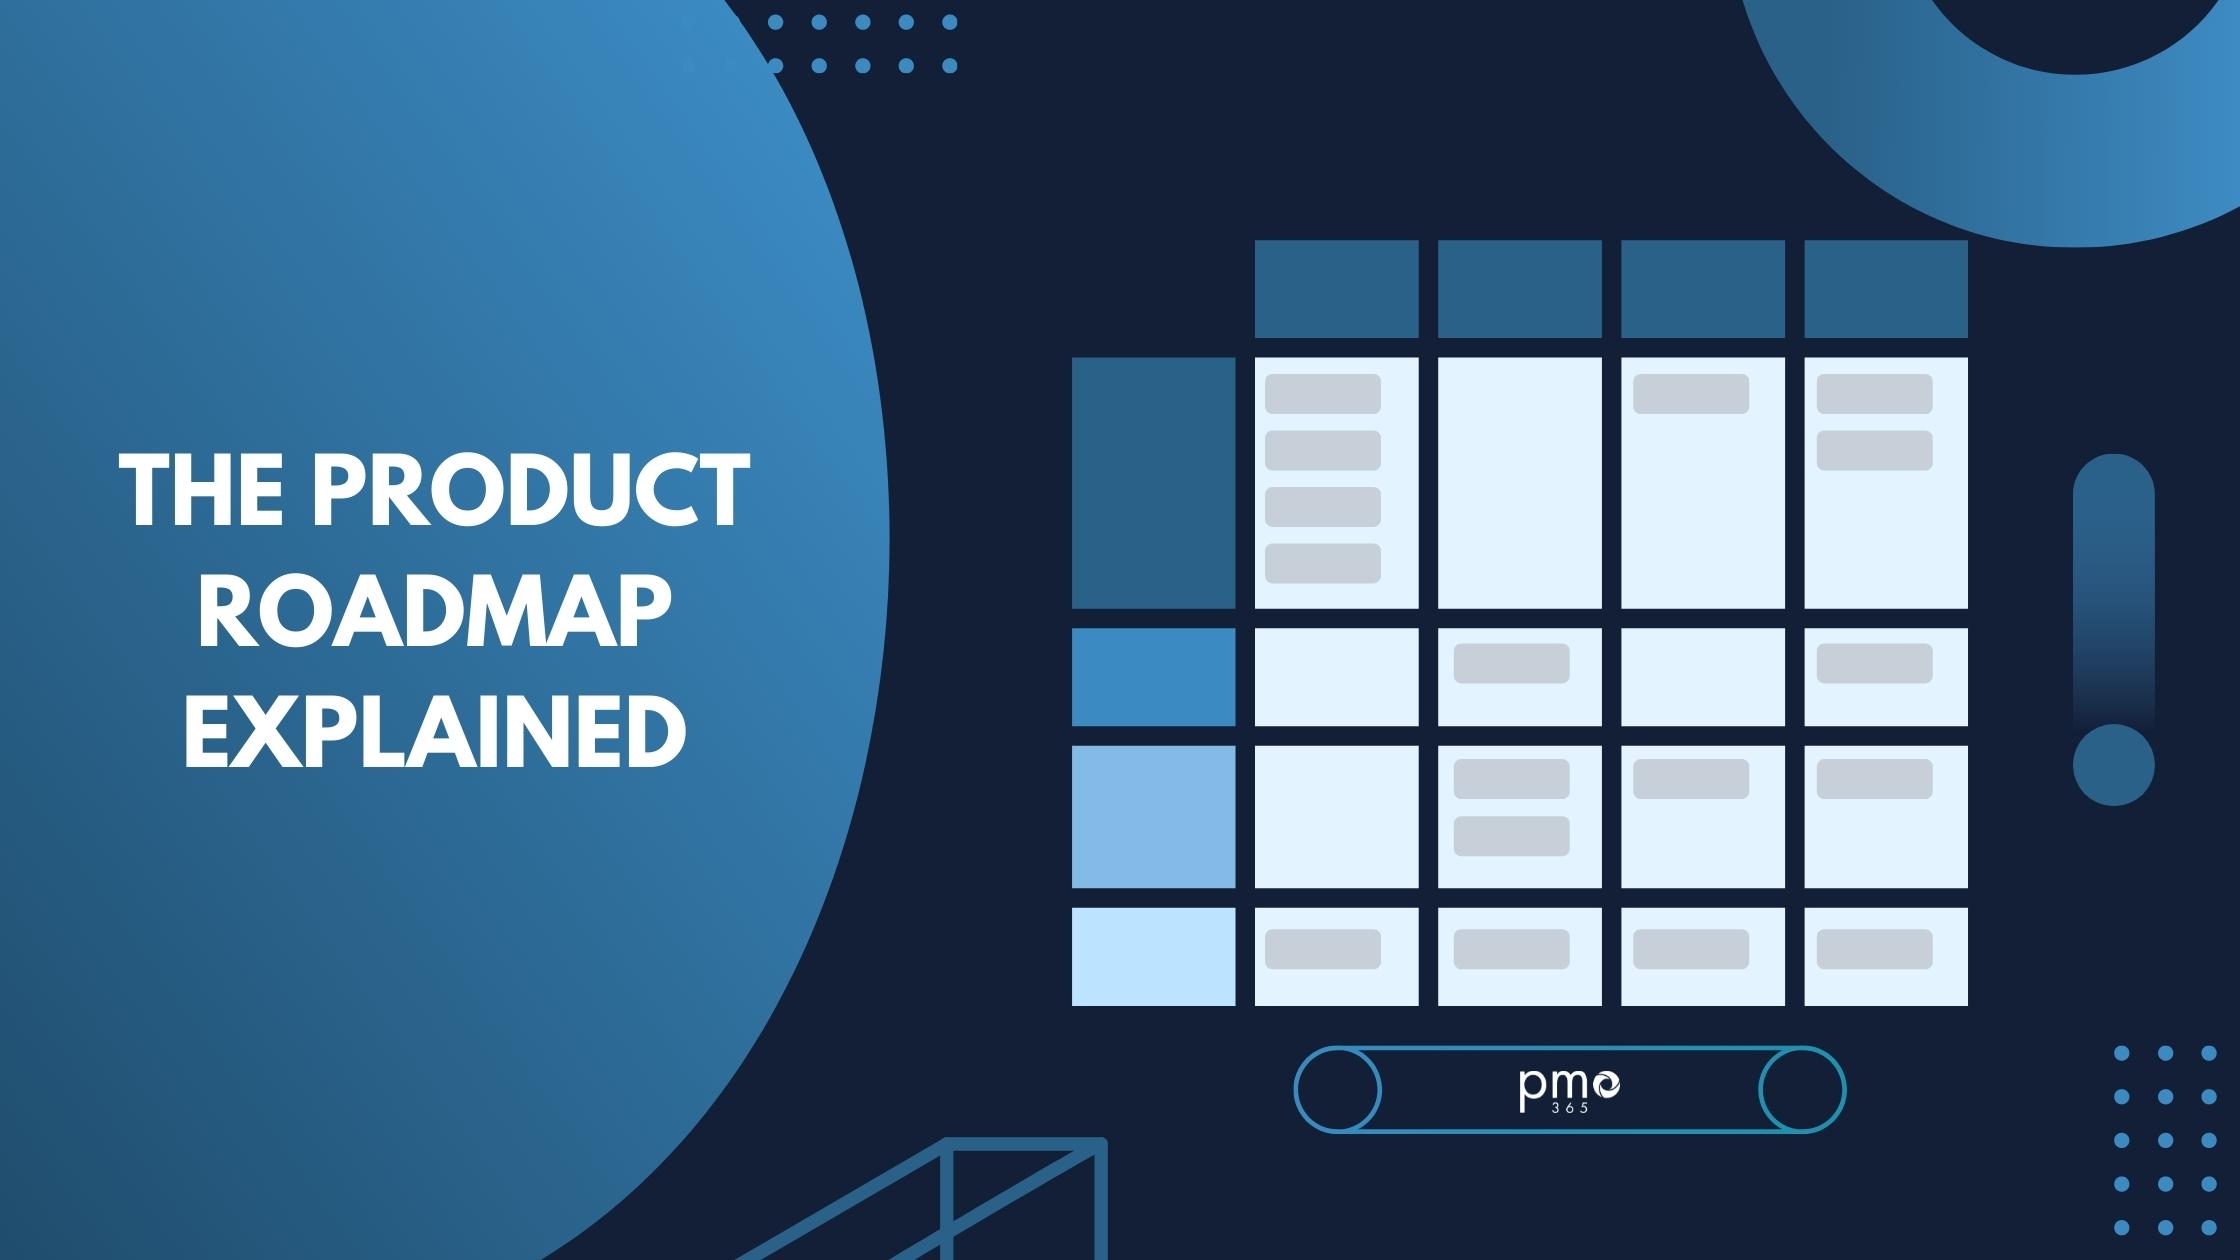 The Product Roadmap Explained